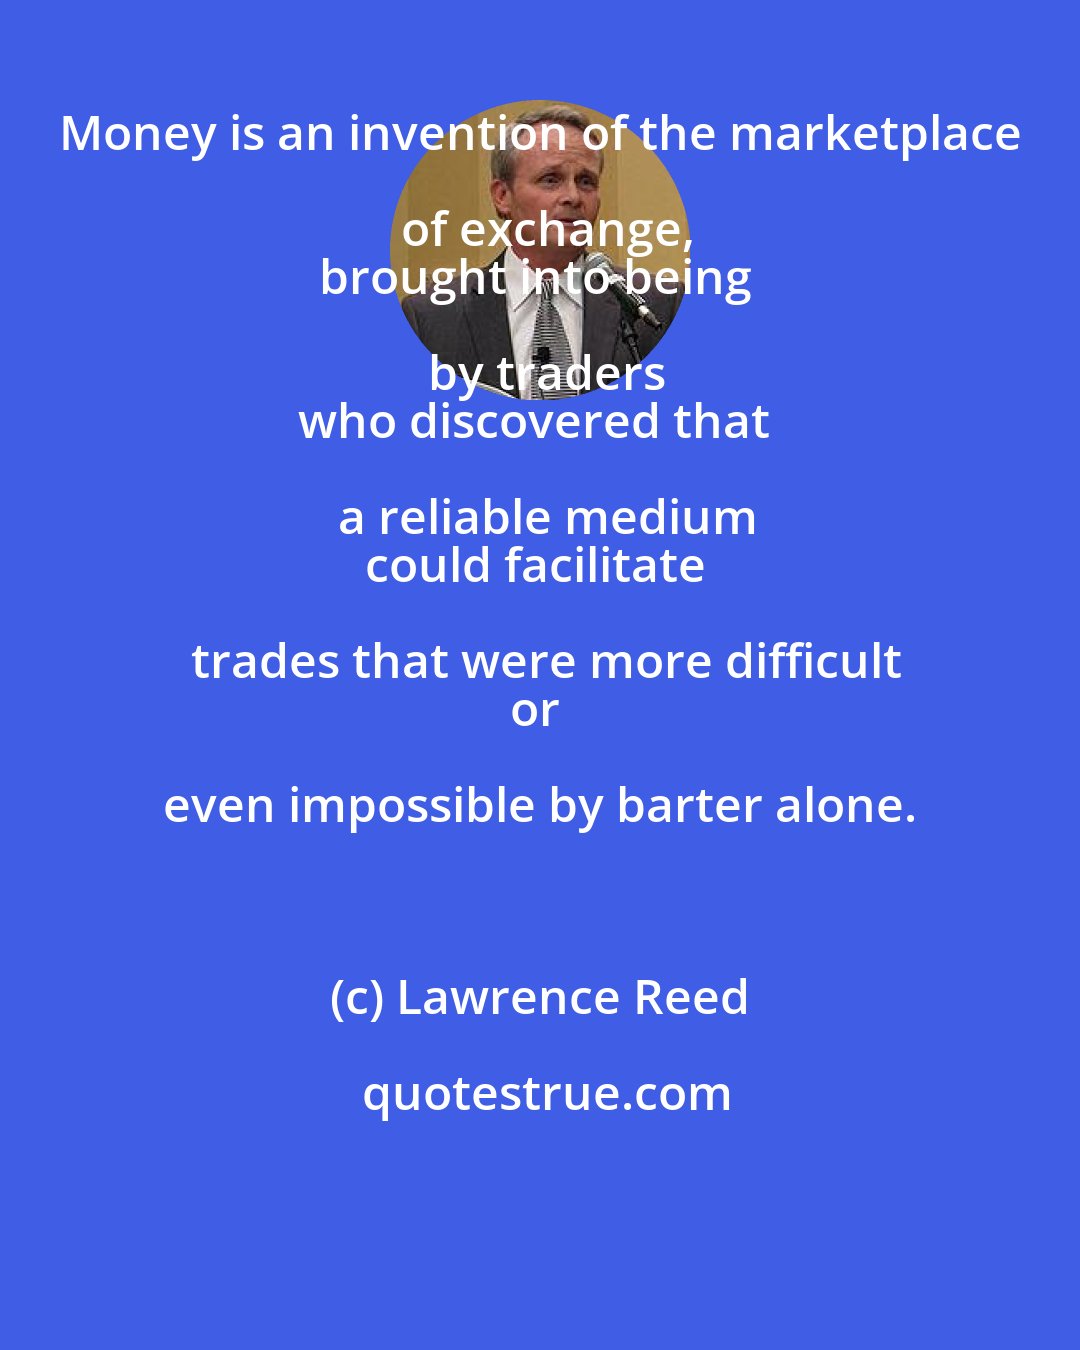 Lawrence Reed: Money is an invention of the marketplace of exchange,
brought into being by traders
who discovered that a reliable medium
could facilitate trades that were more difficult
or even impossible by barter alone.